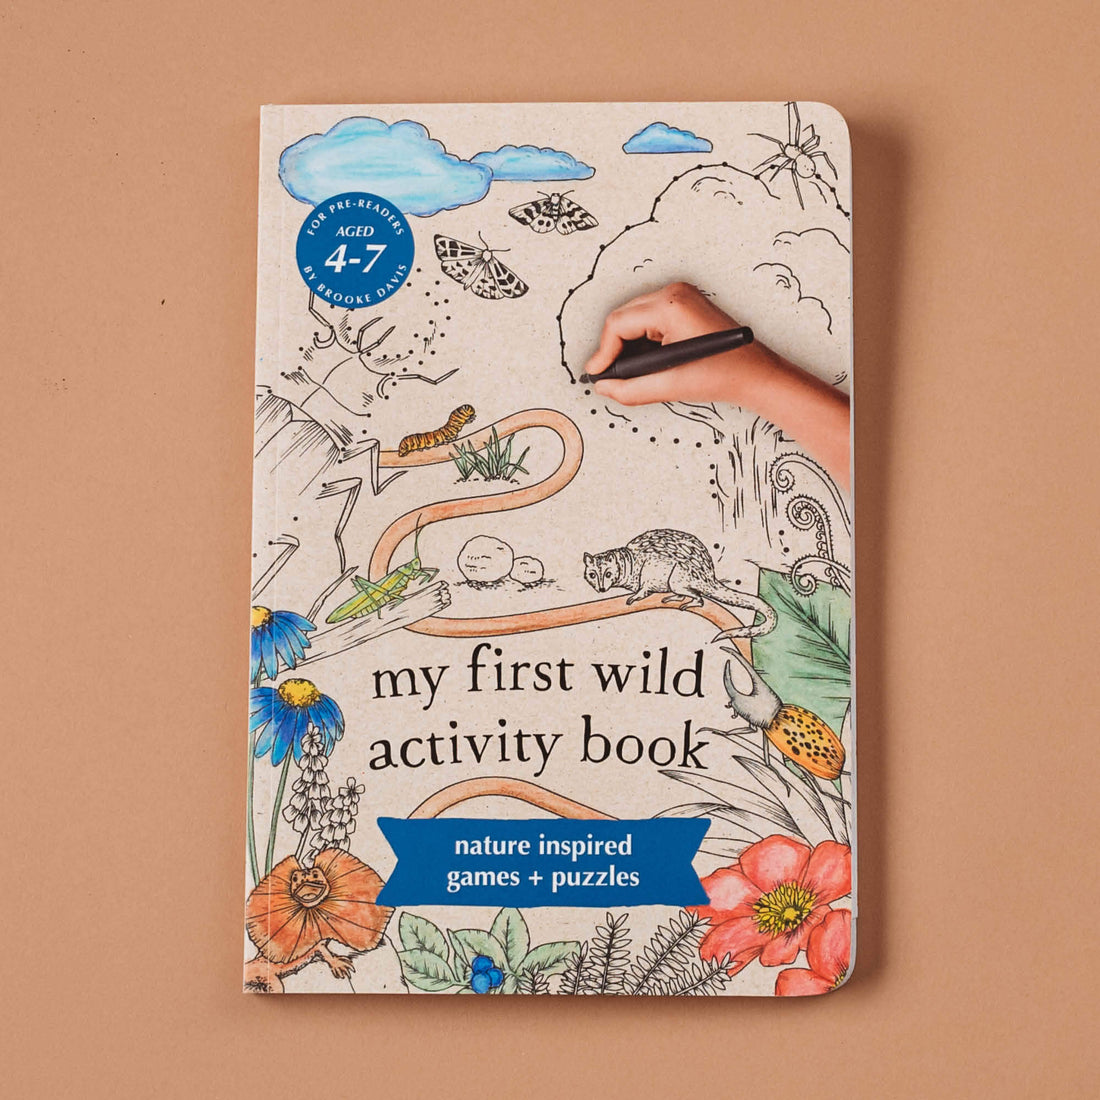 My First Wild Activity Book made in Australia by Your Wild Books